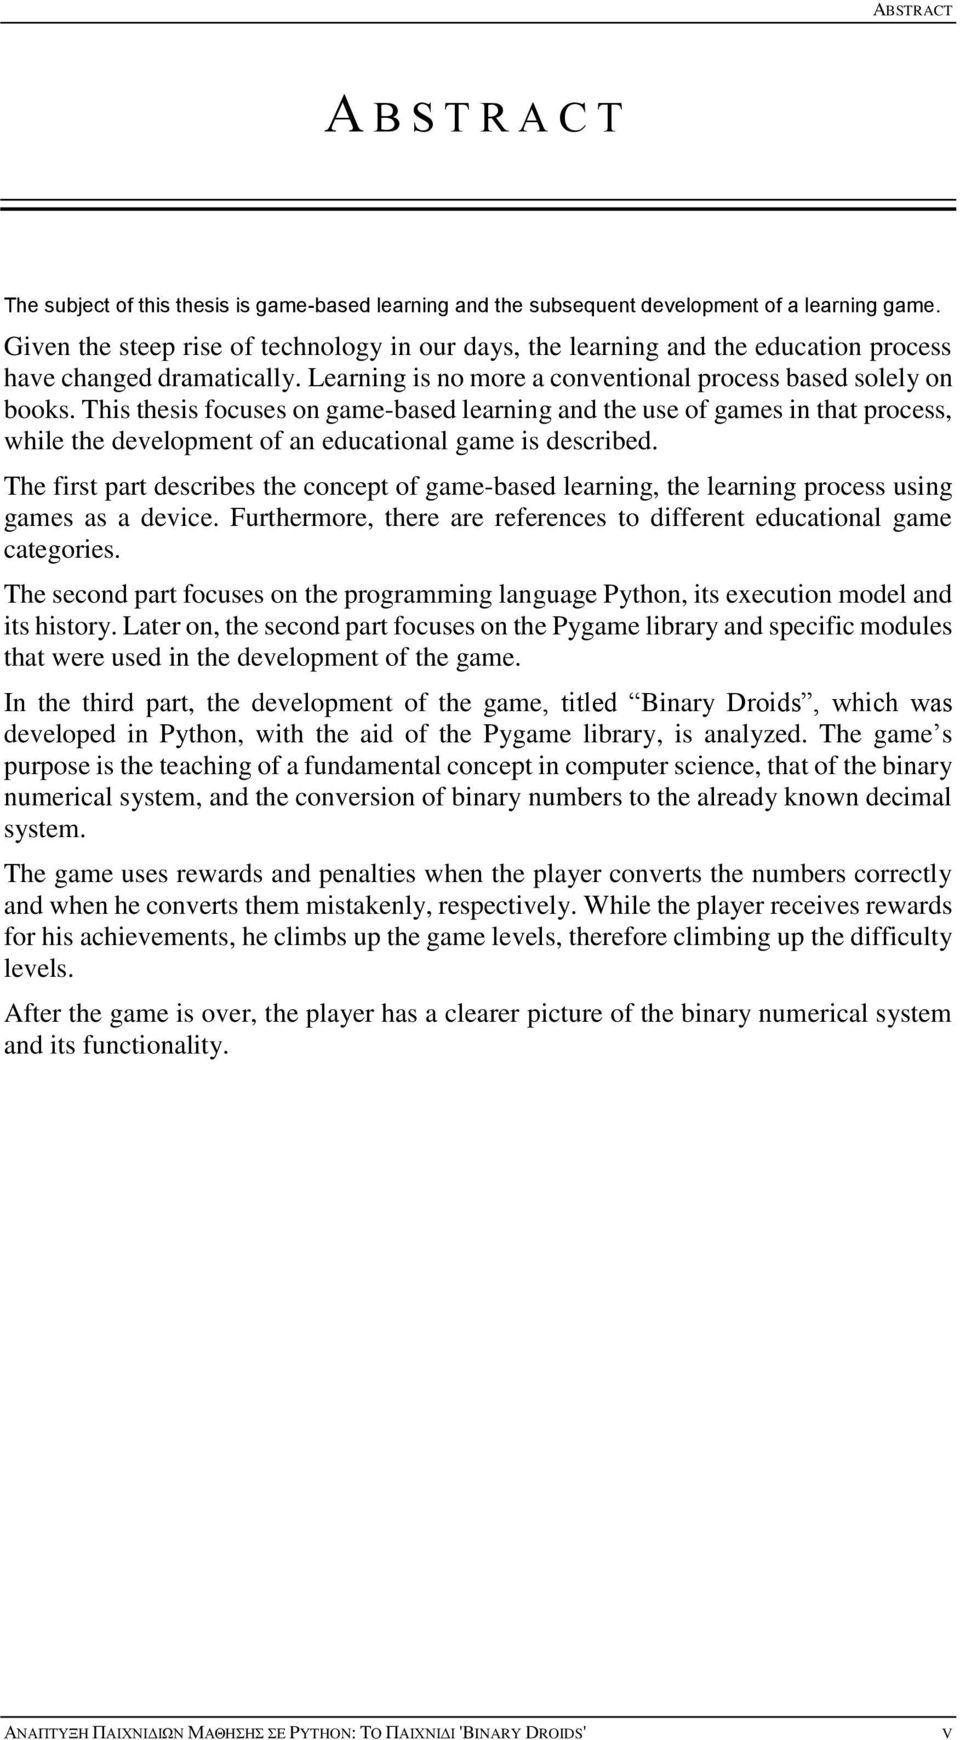 This thesis focuses on game-based learning and the use of games in that process, while the development of an educational game is described.